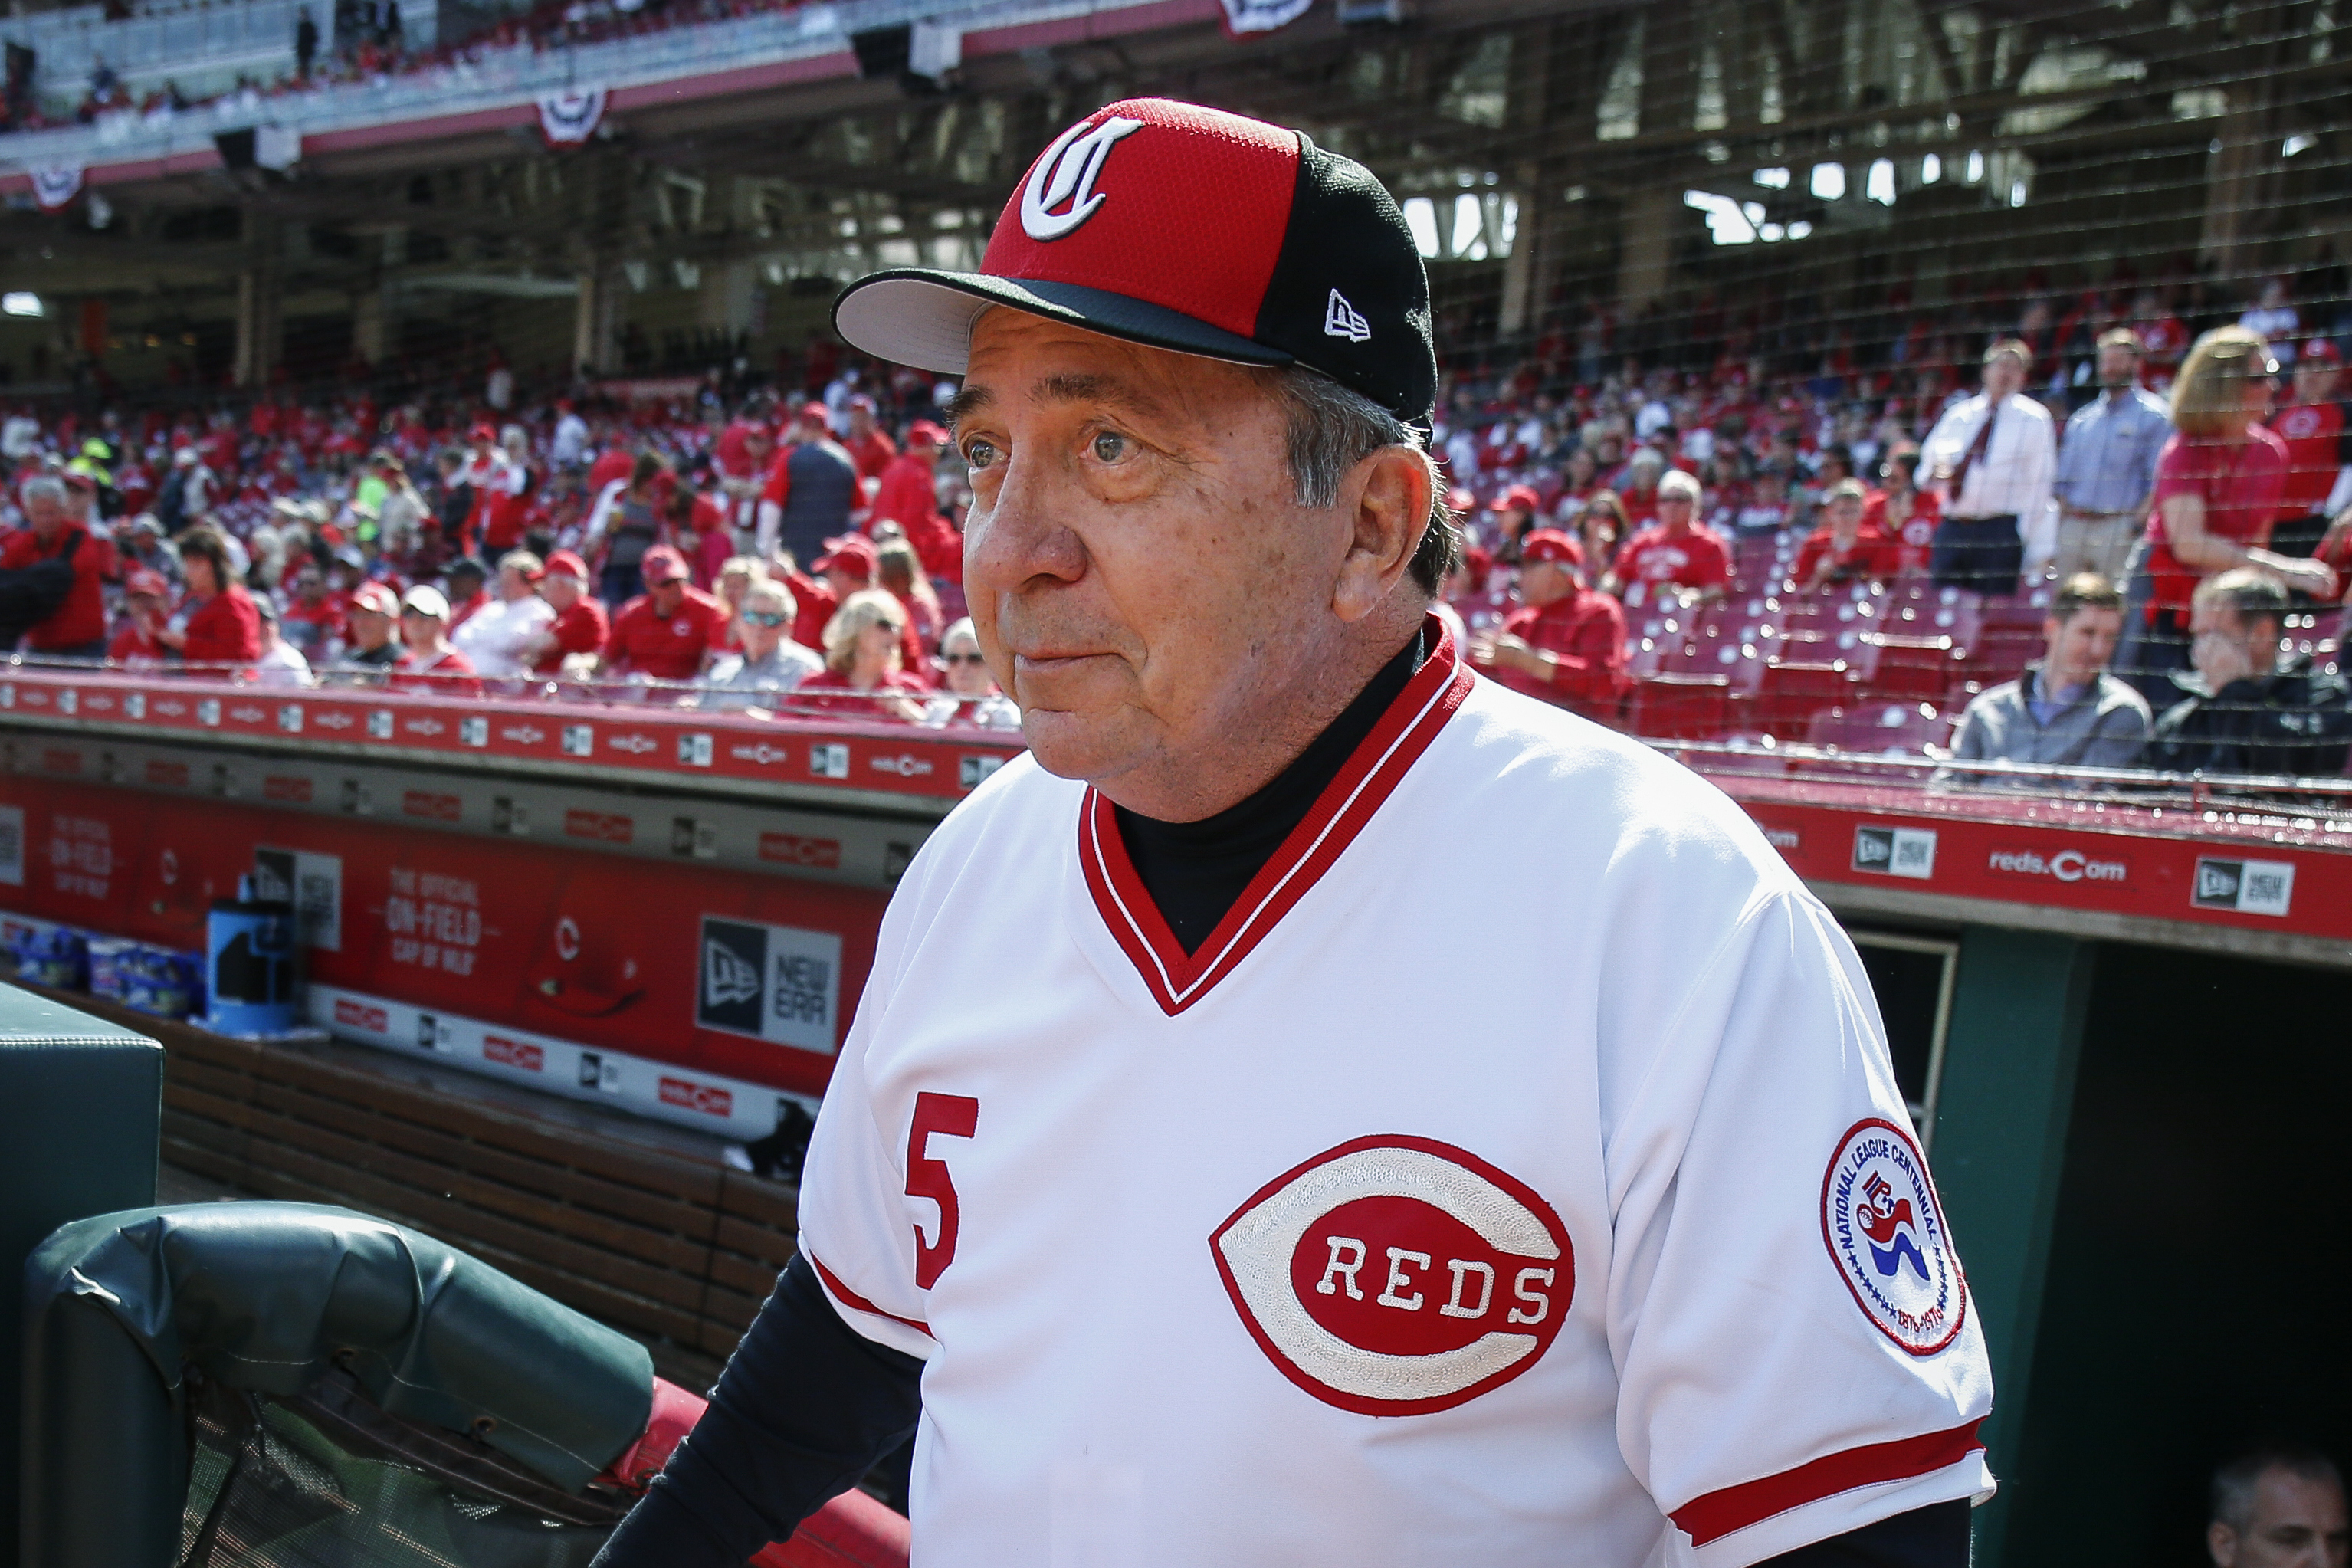 Reaction to comments Johnny Bench made at Reds Hall of Fame induction 